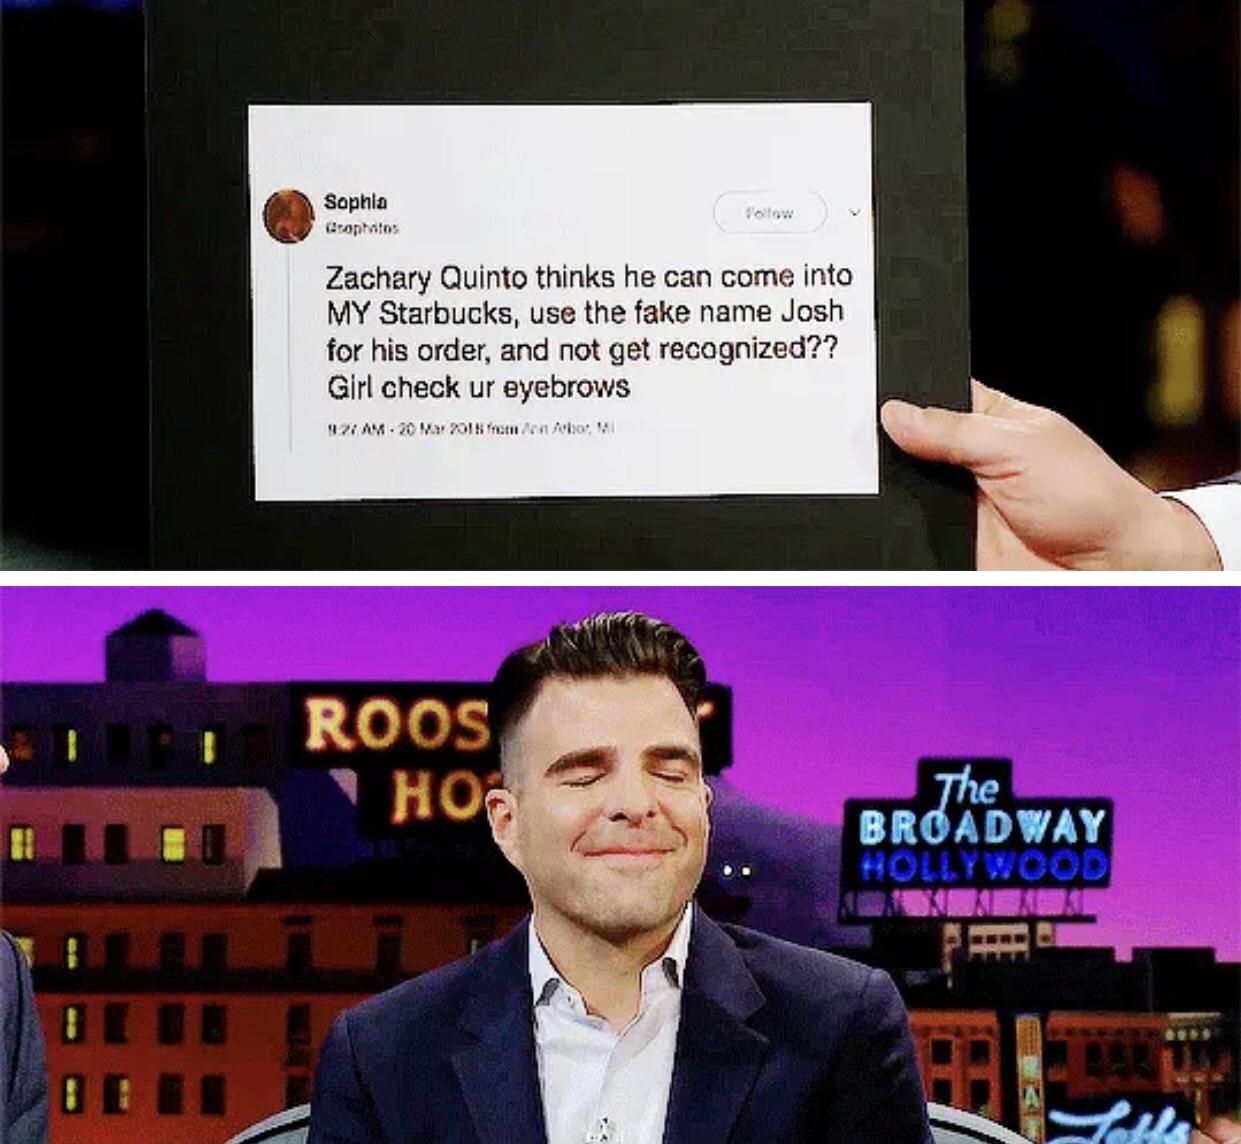 Zachary Quinto was busted for his fake Starbucks name